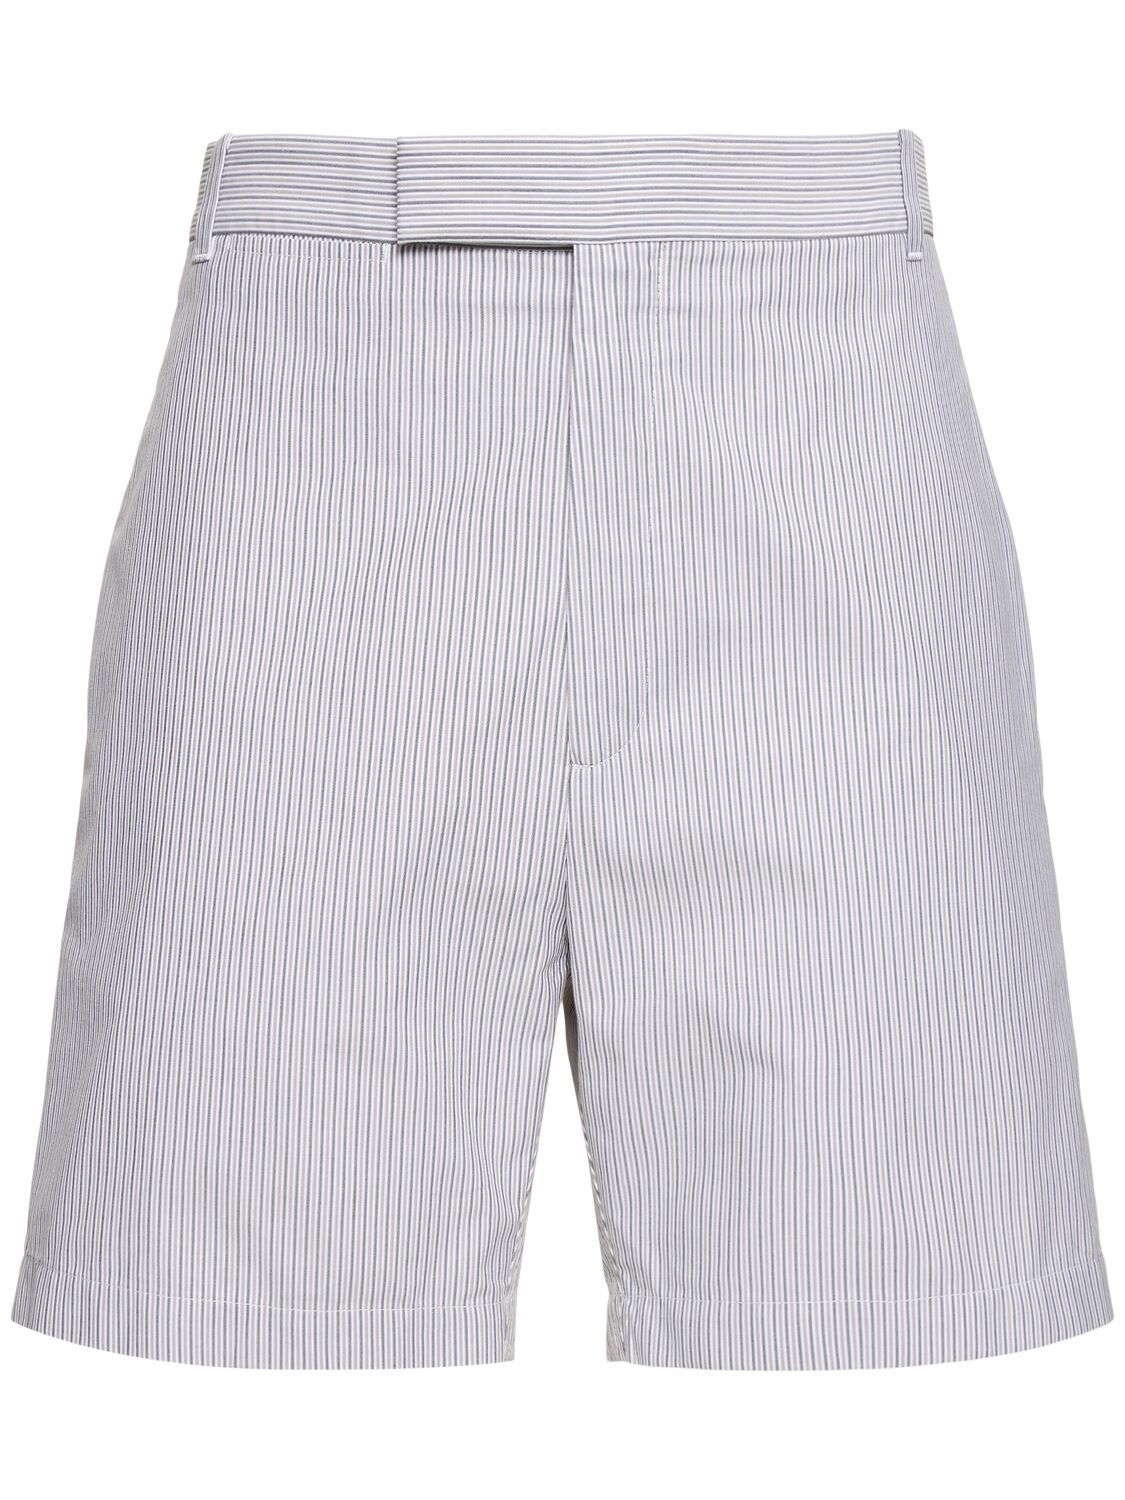 Image of Cotton Straight Fit Shorts